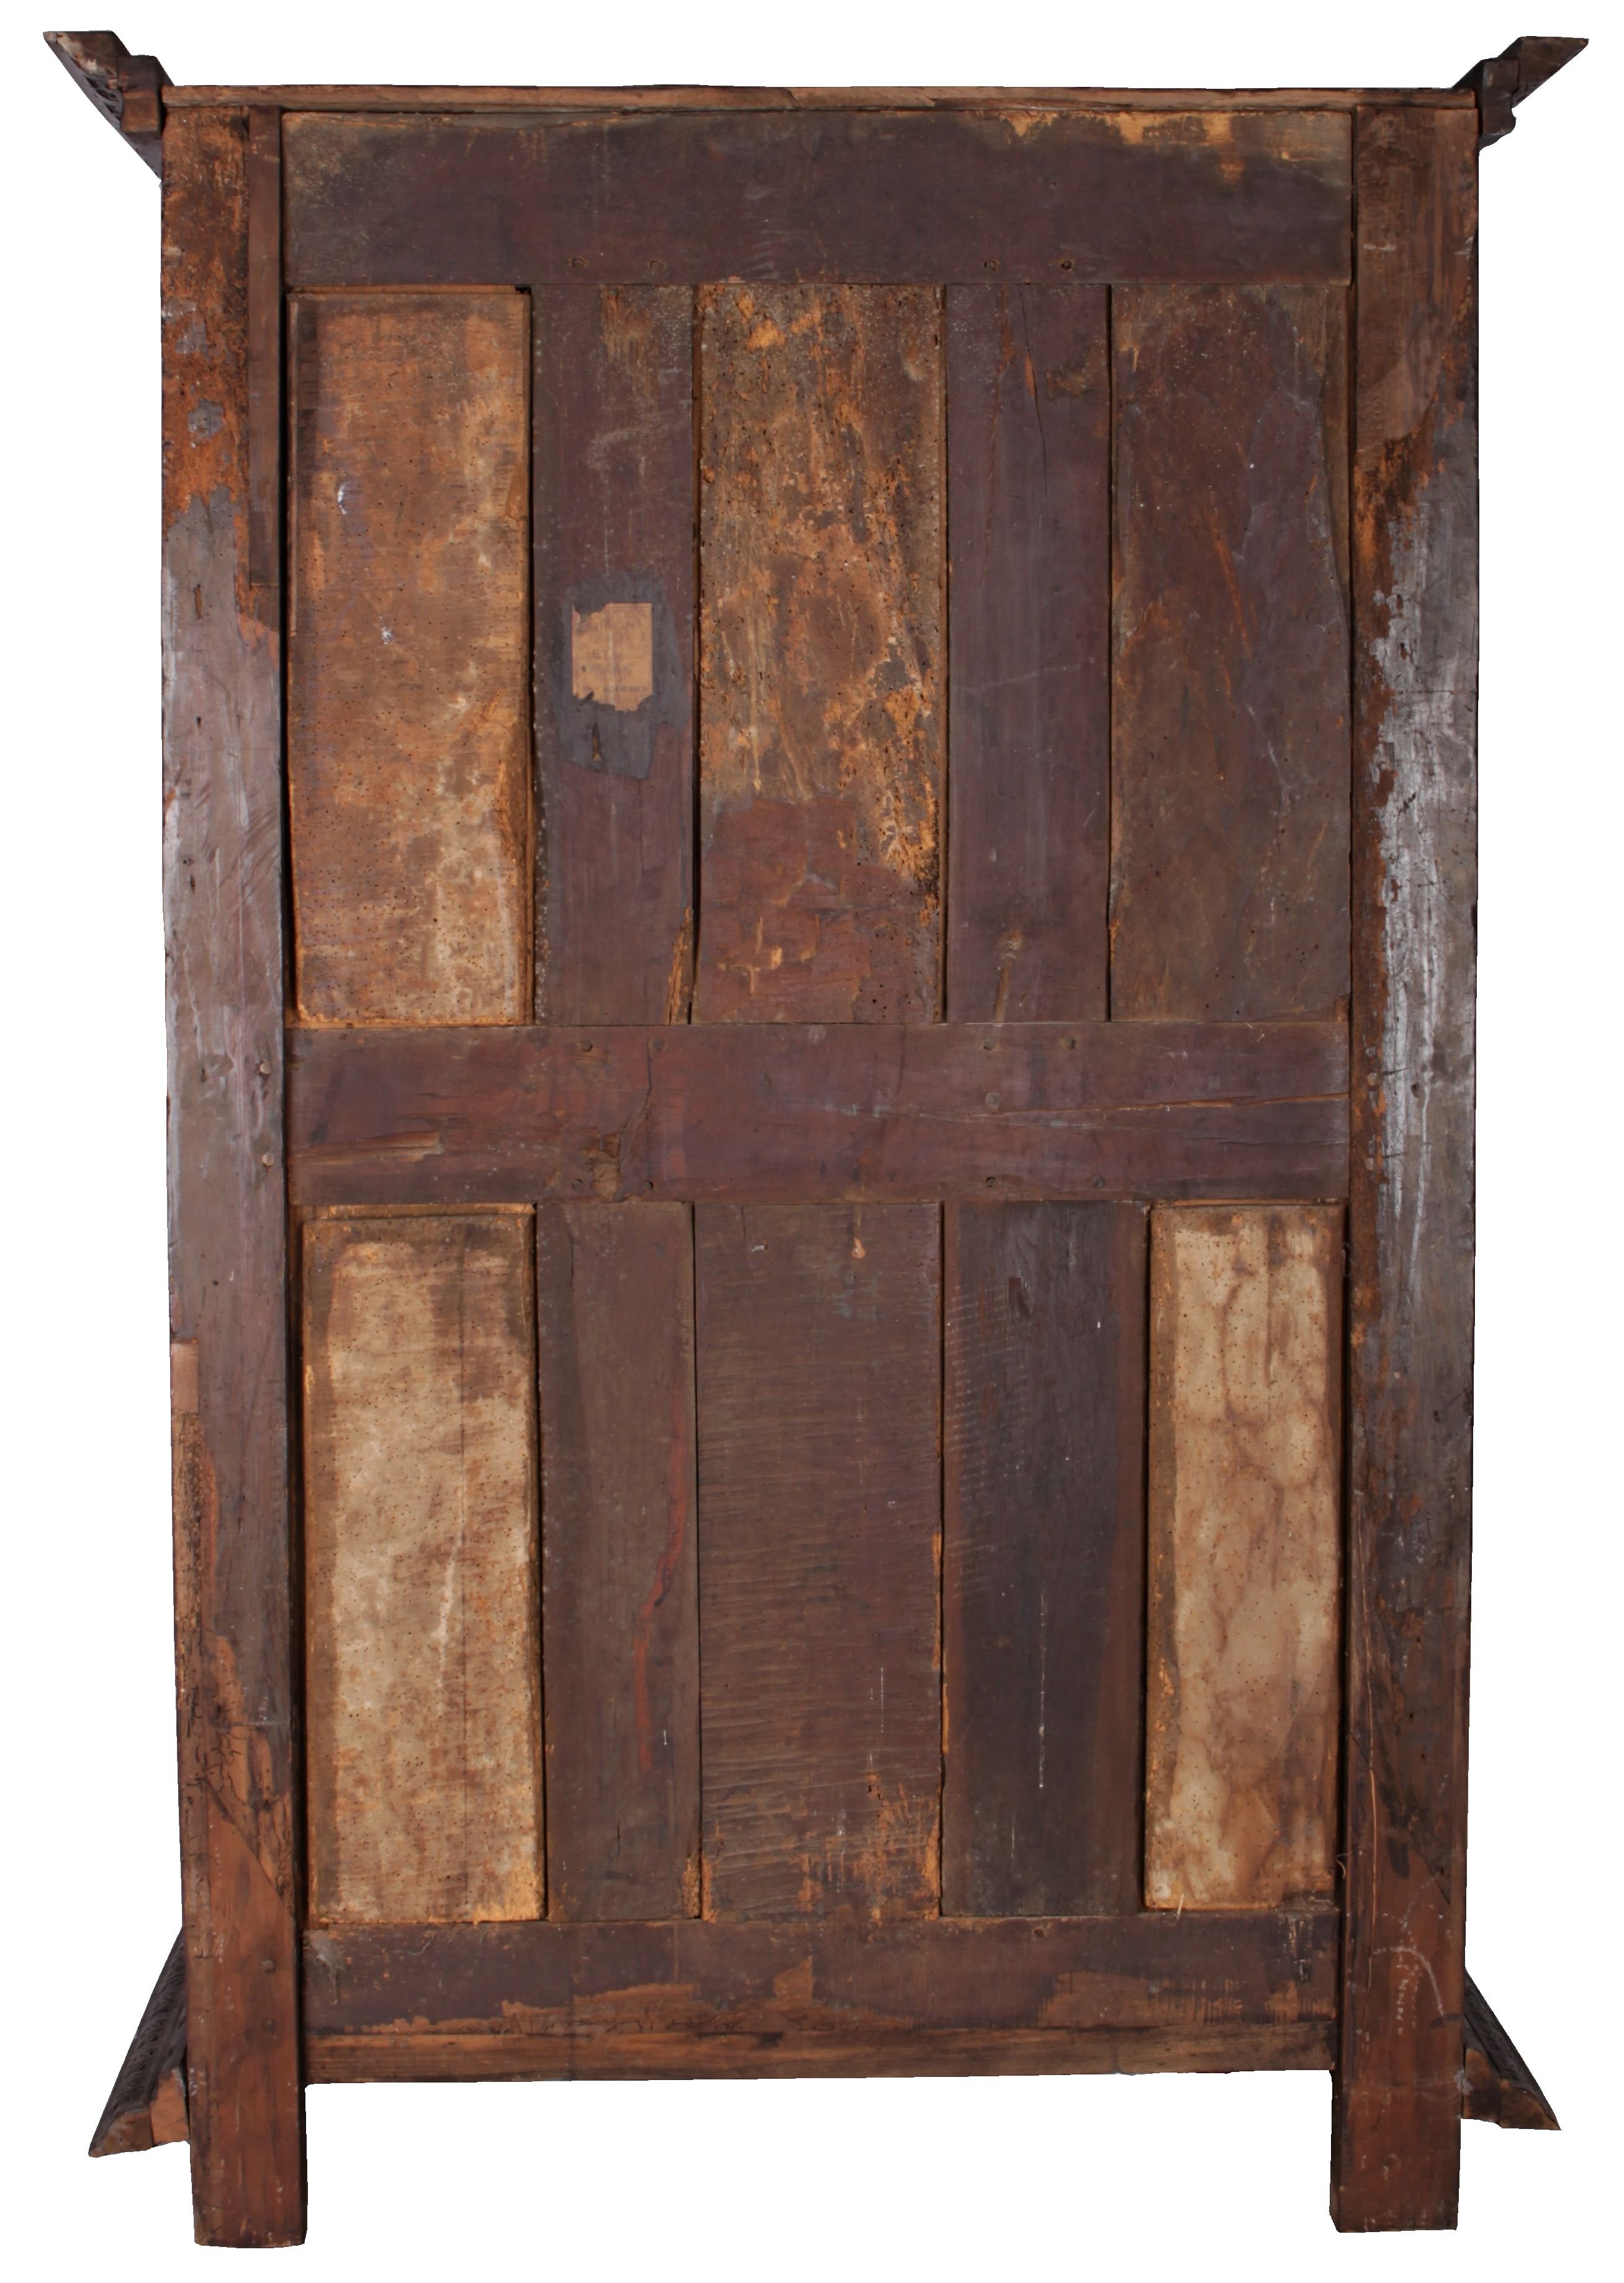 A Rare Renaissance cabinet with carved portraits and coats of arms, 17th century